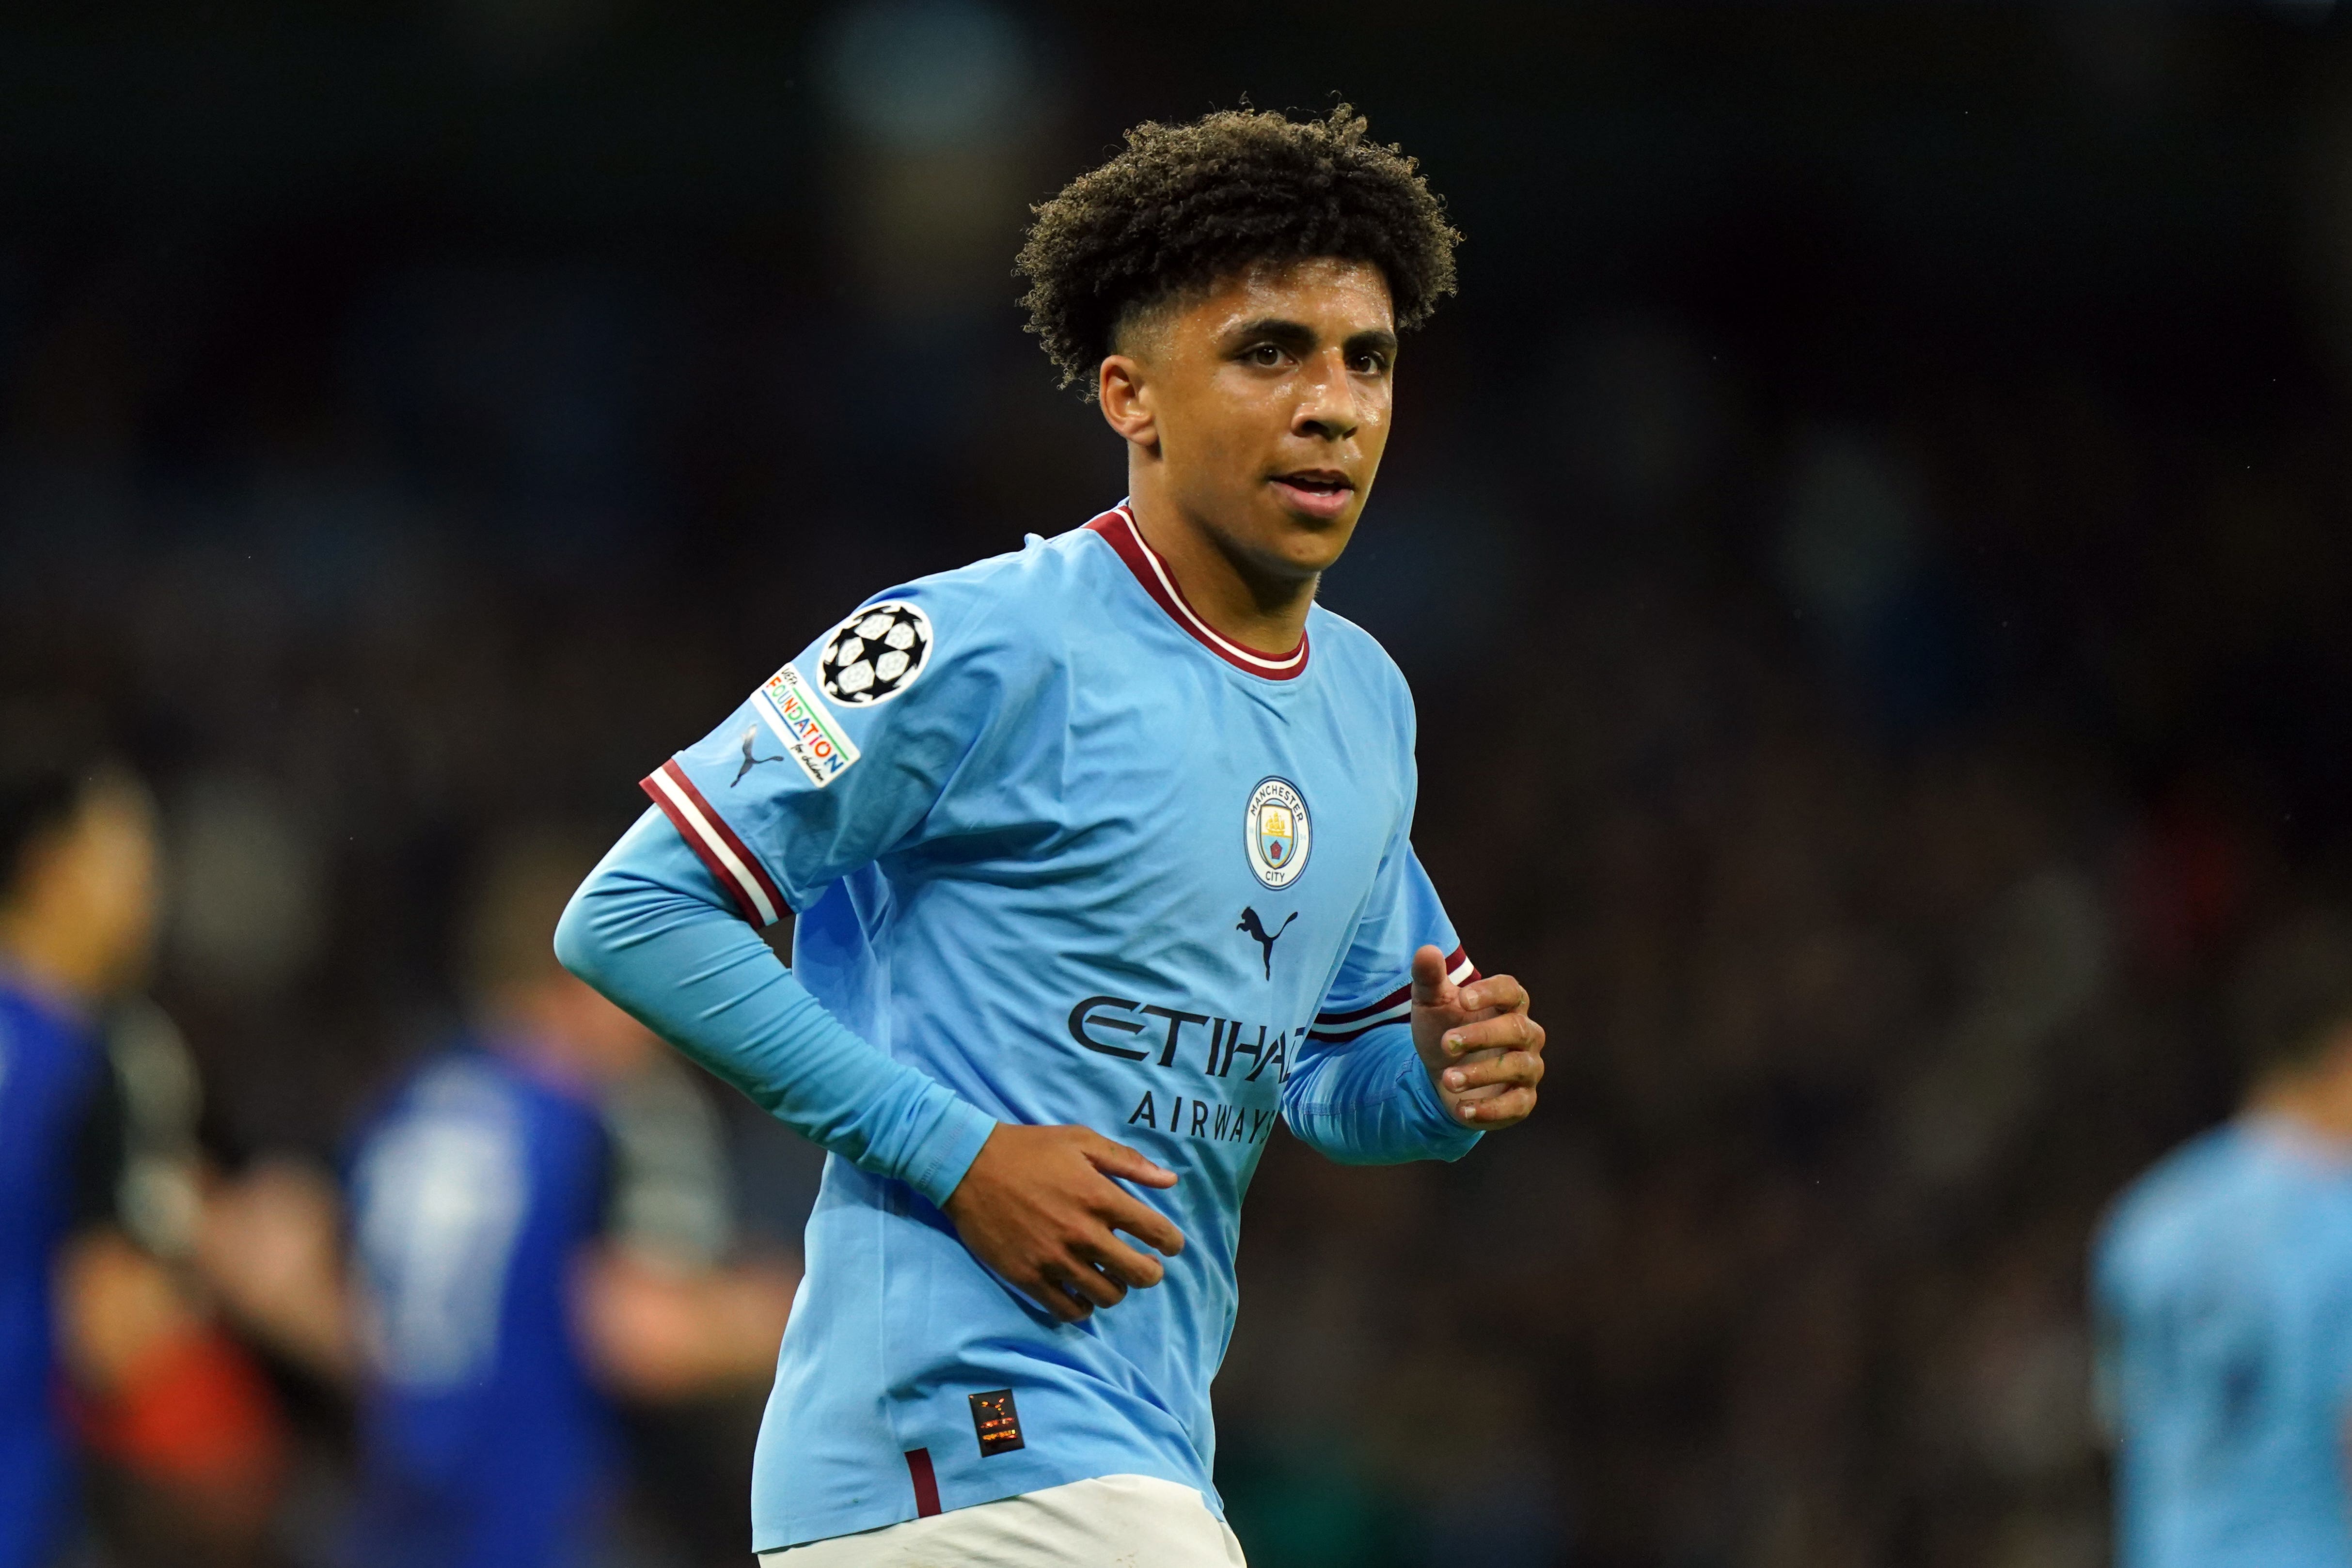 Rico Lewis yet to really feel part of the picture in Man City first team | The Independent